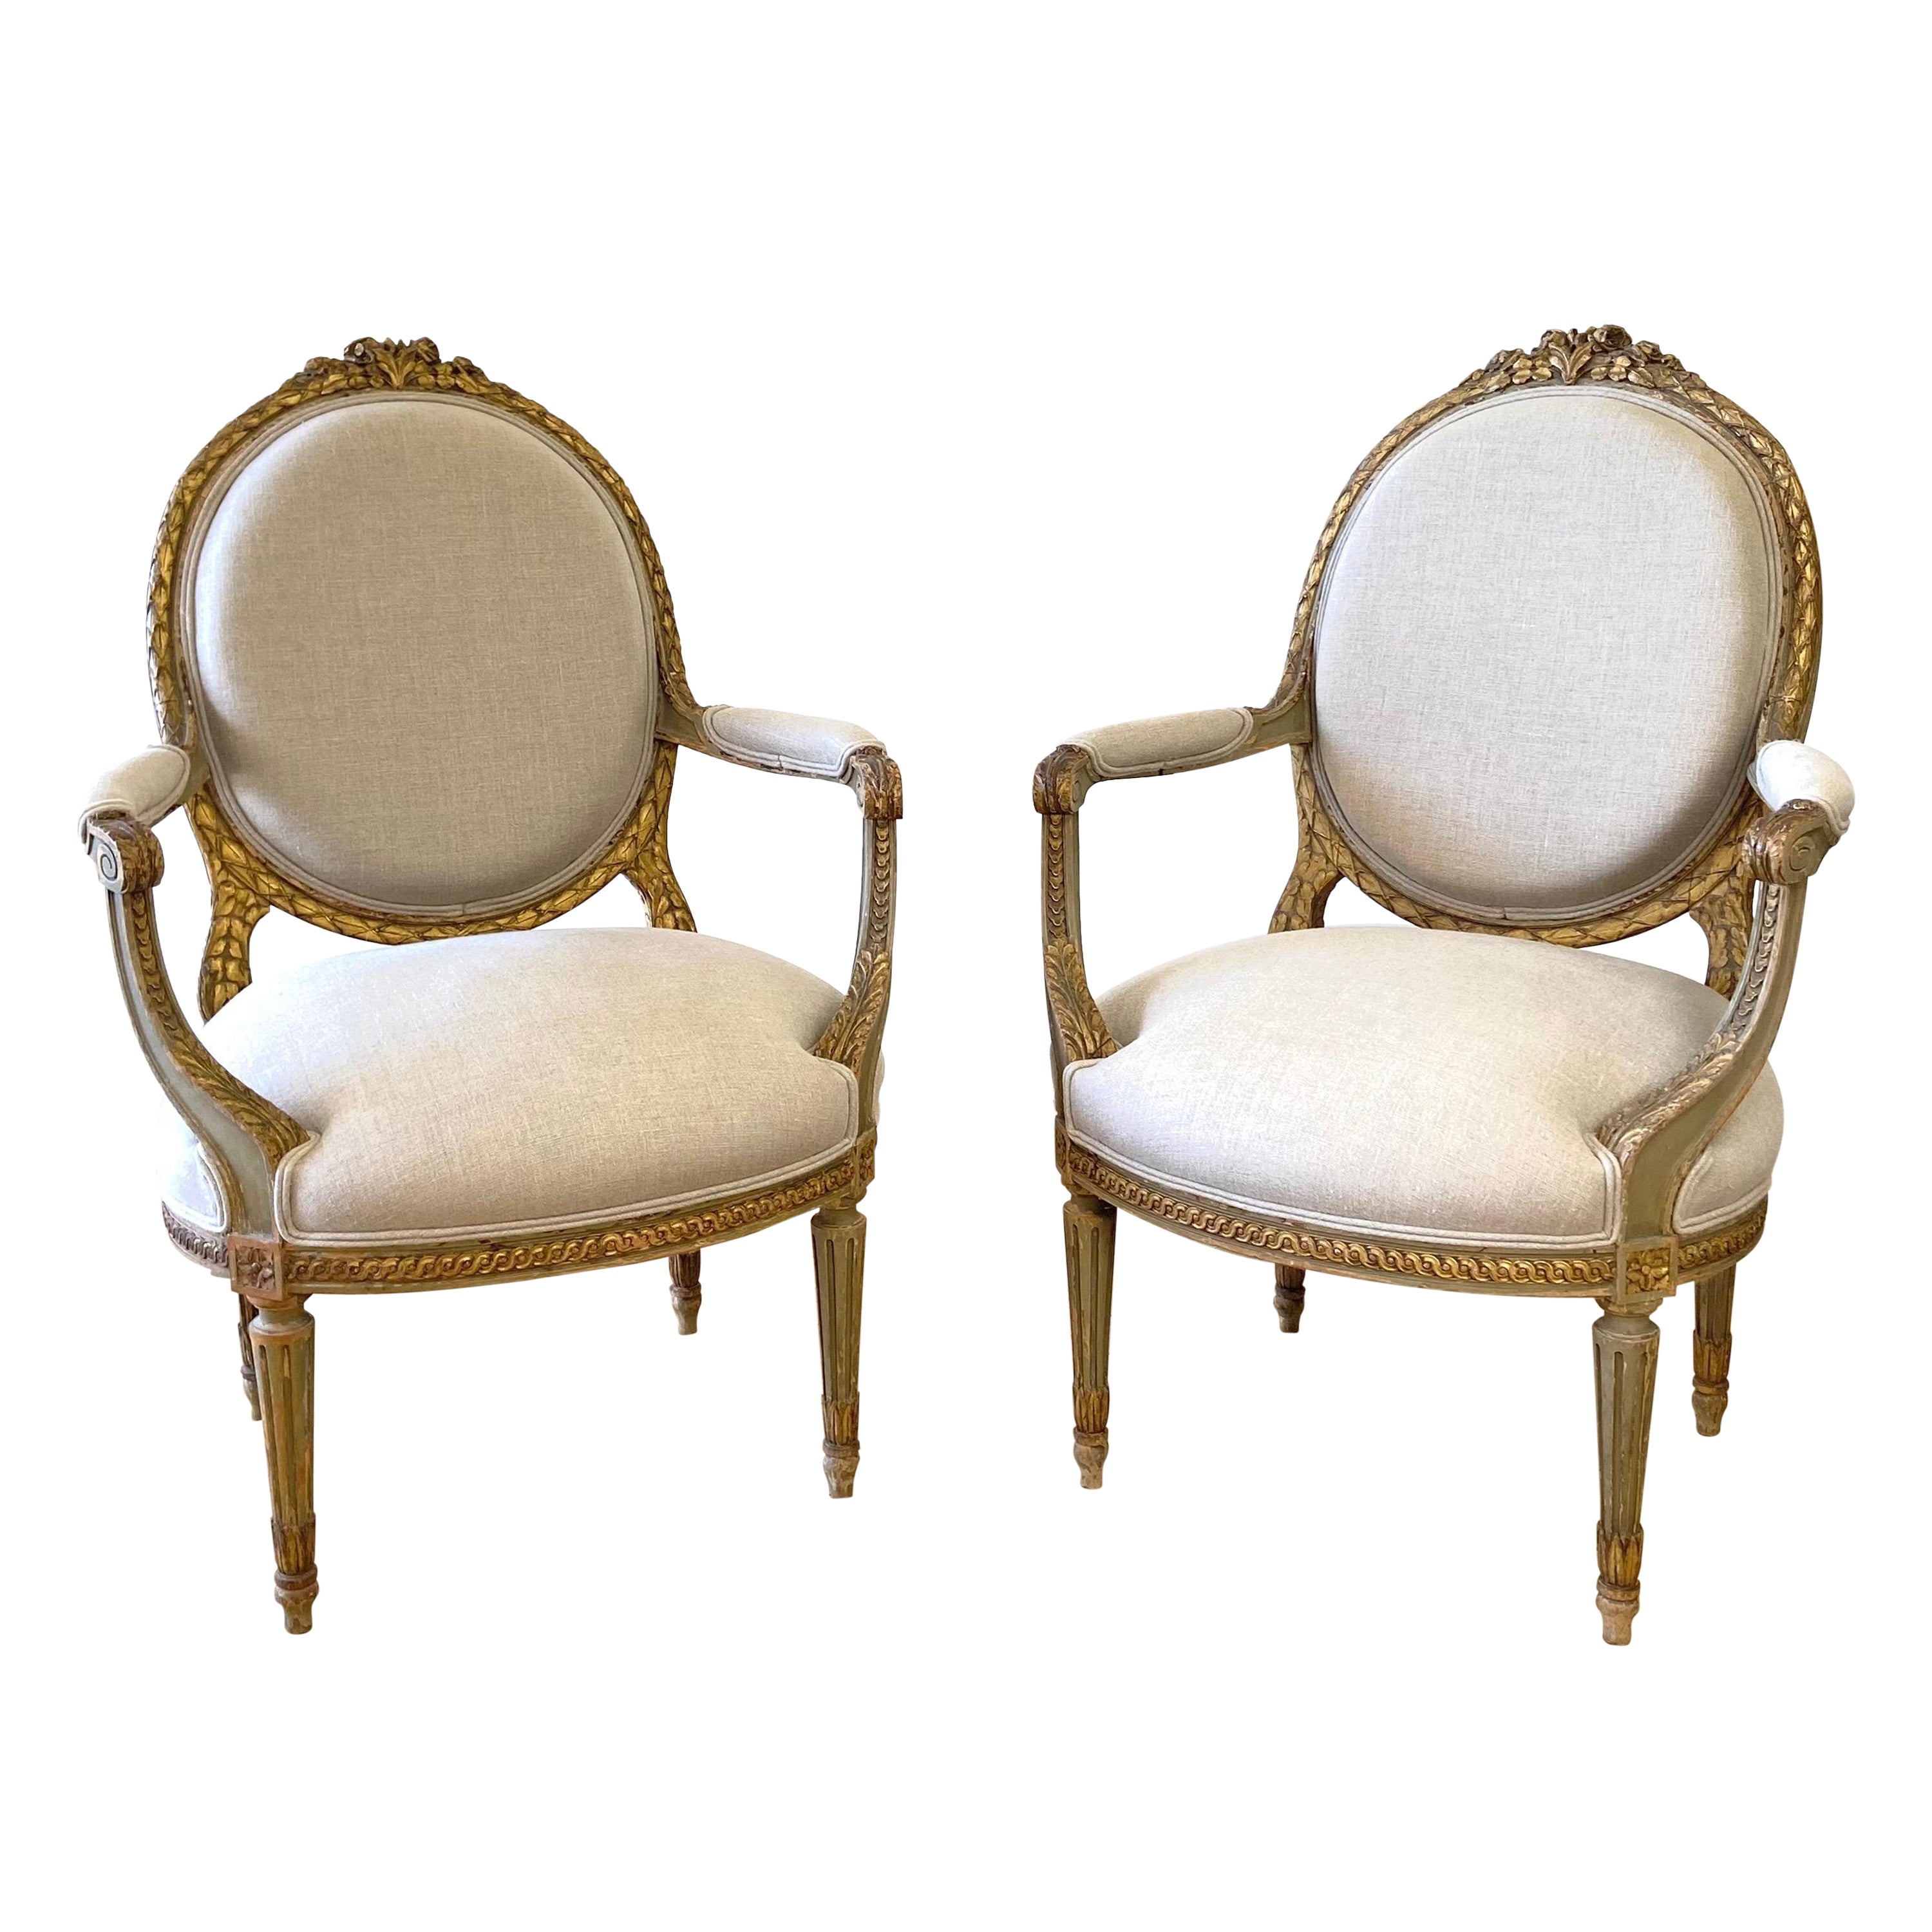 A Large Pair Of Louis Xvi Style Gilt Wood Arm Chairs Auction